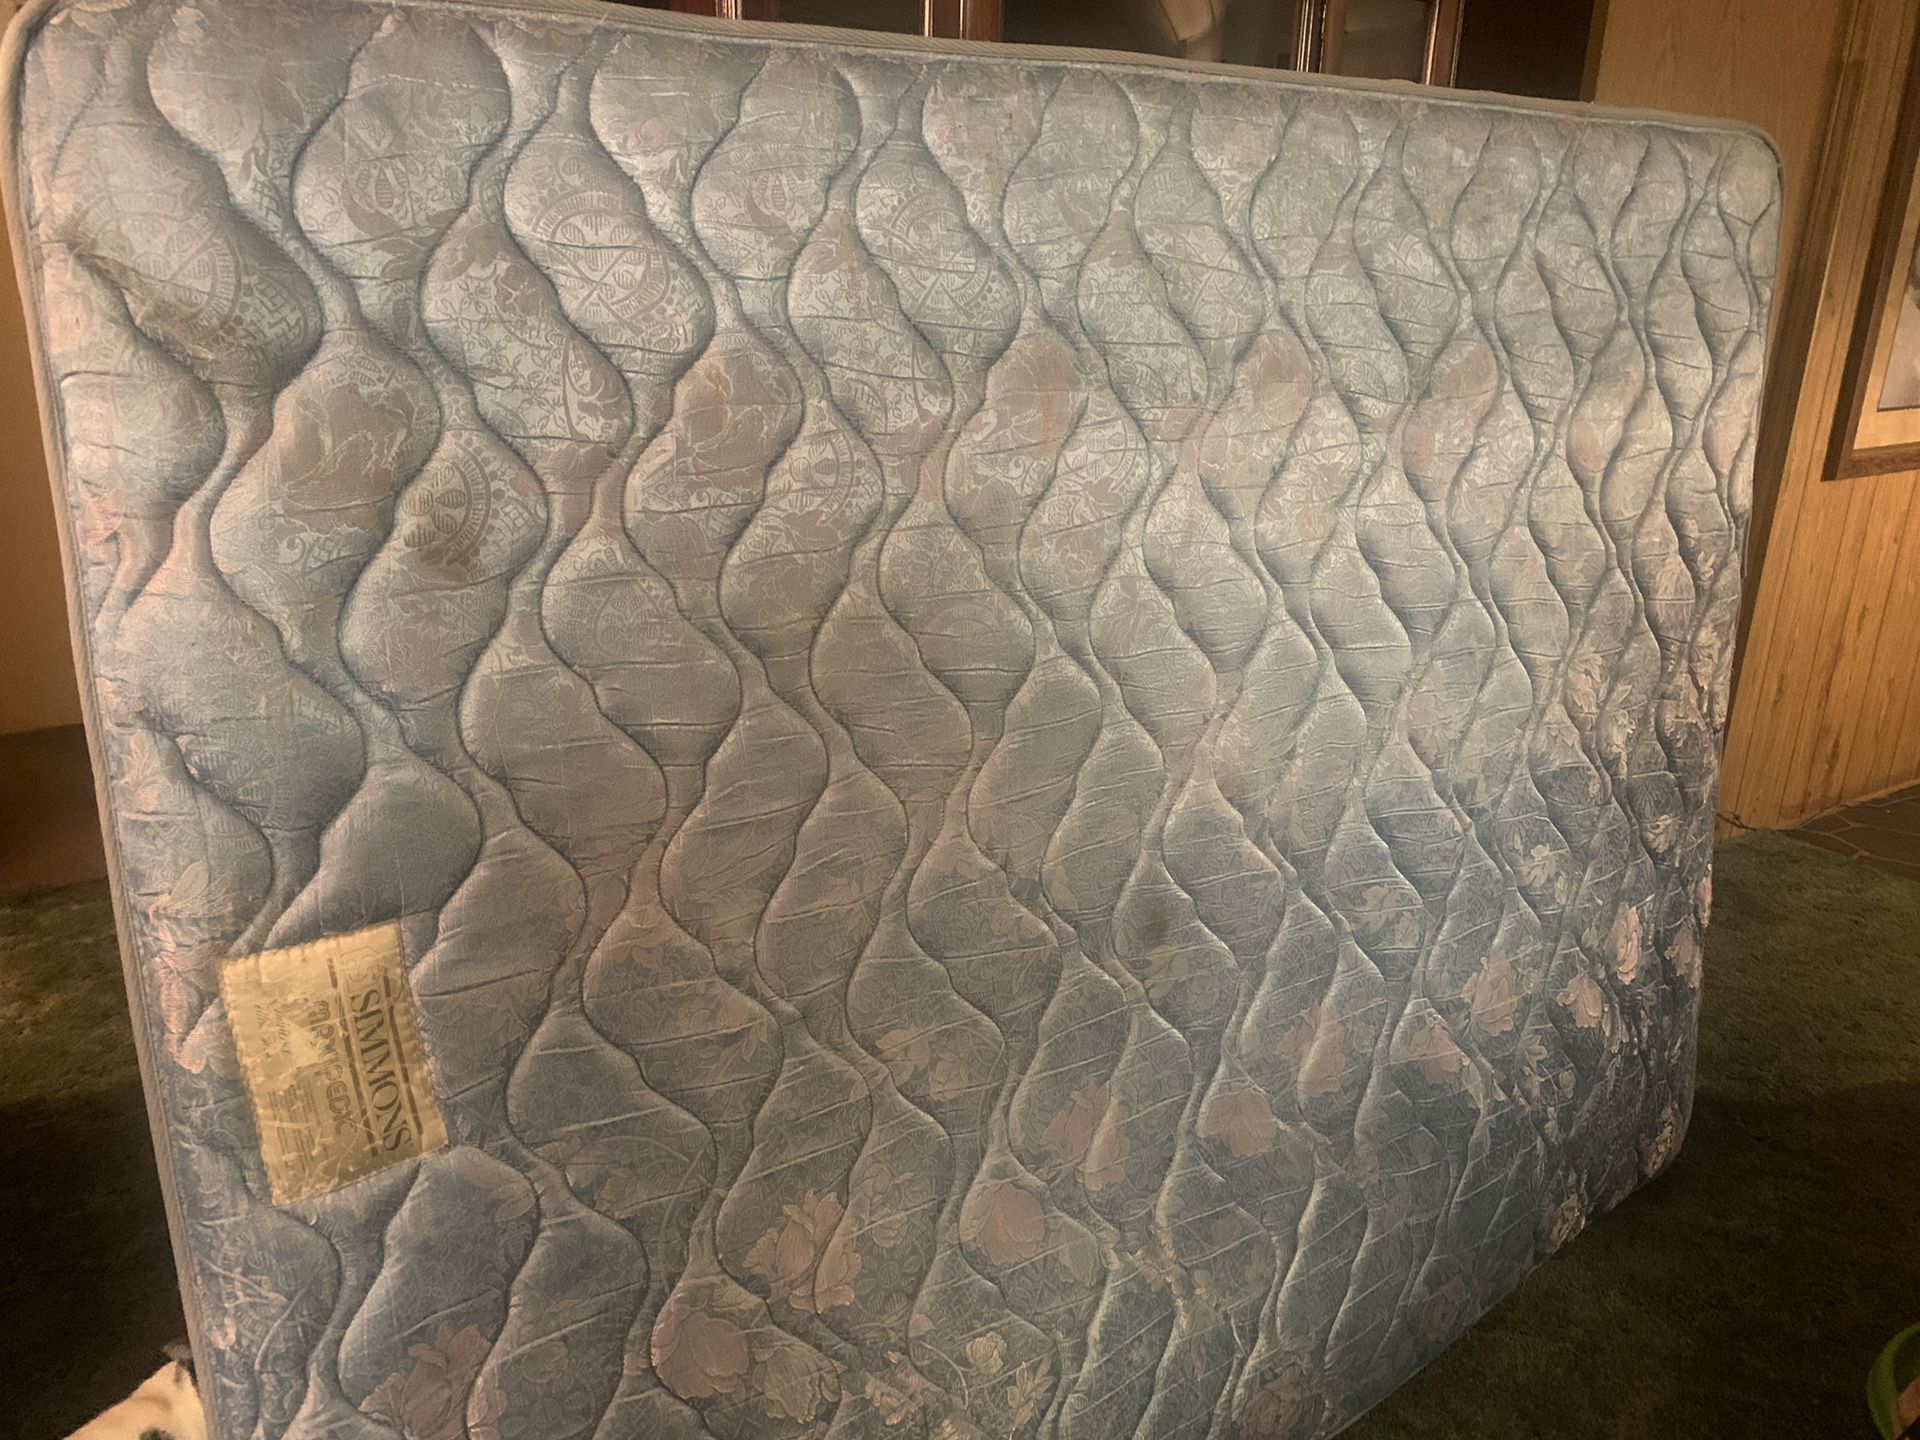 Looking for A full size mattress is good condition